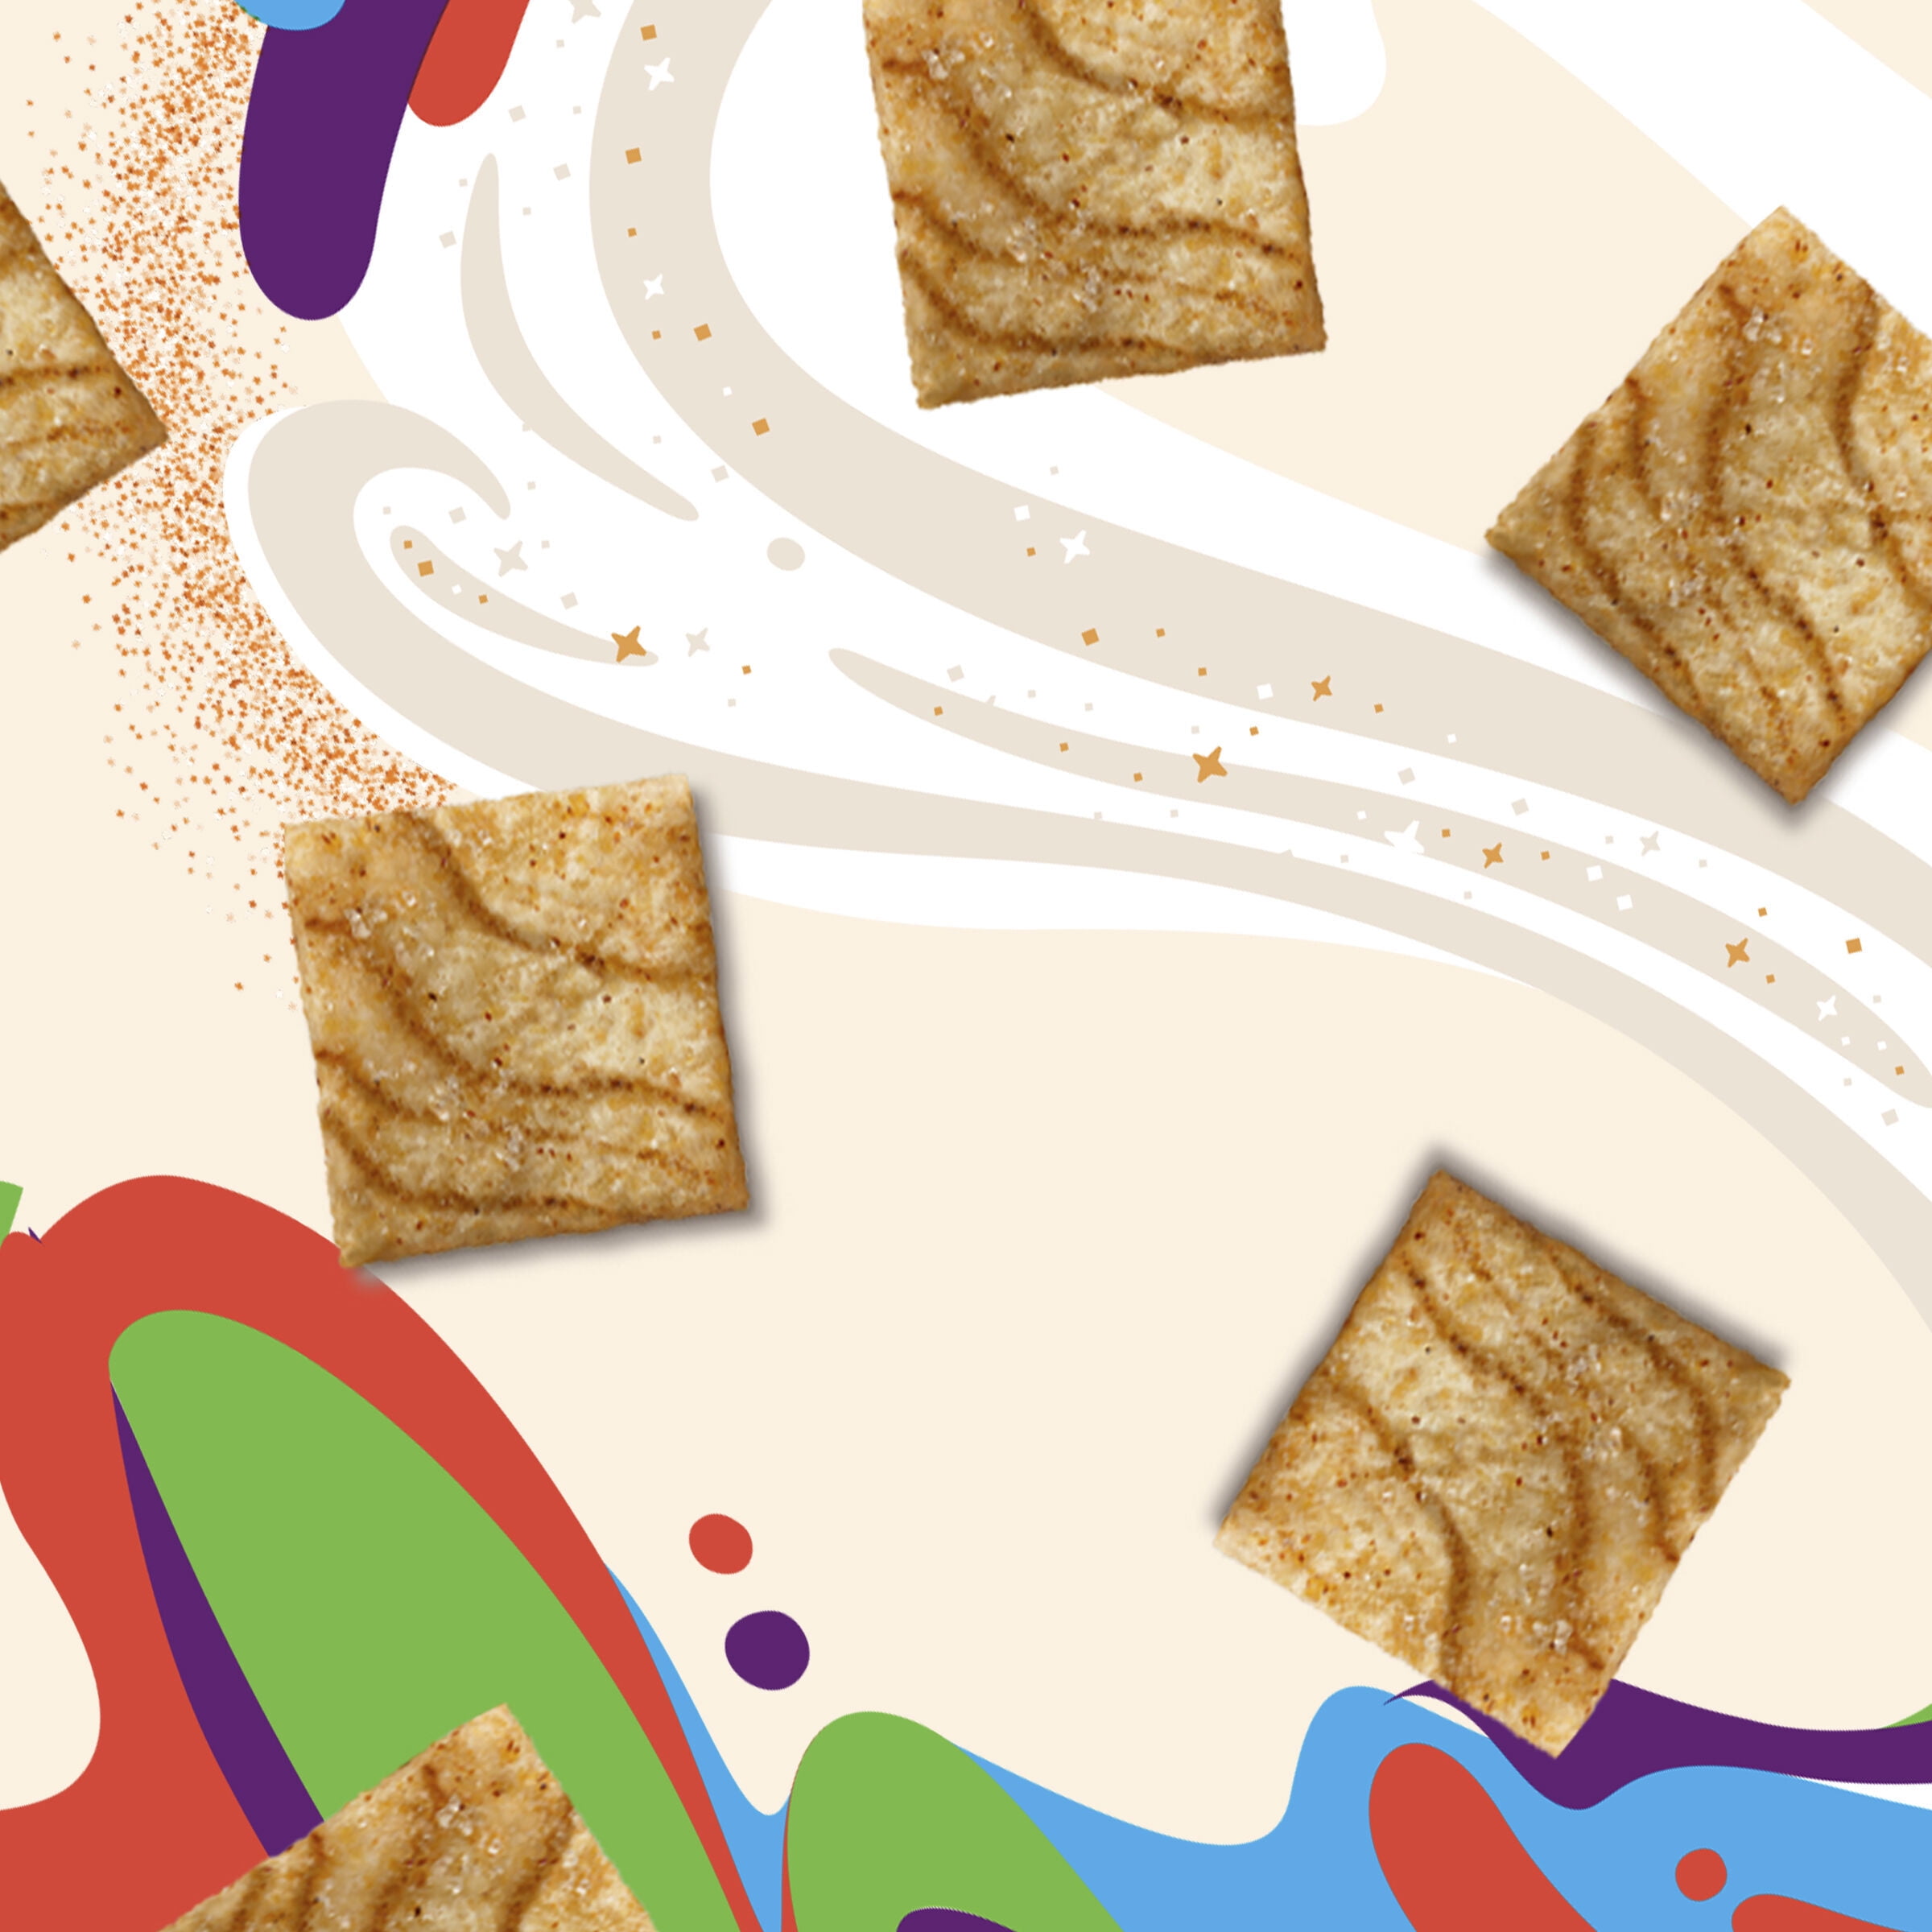 Stuffed Puffs Unveils New Collab with Cinnamon Toast Crunch  License Global